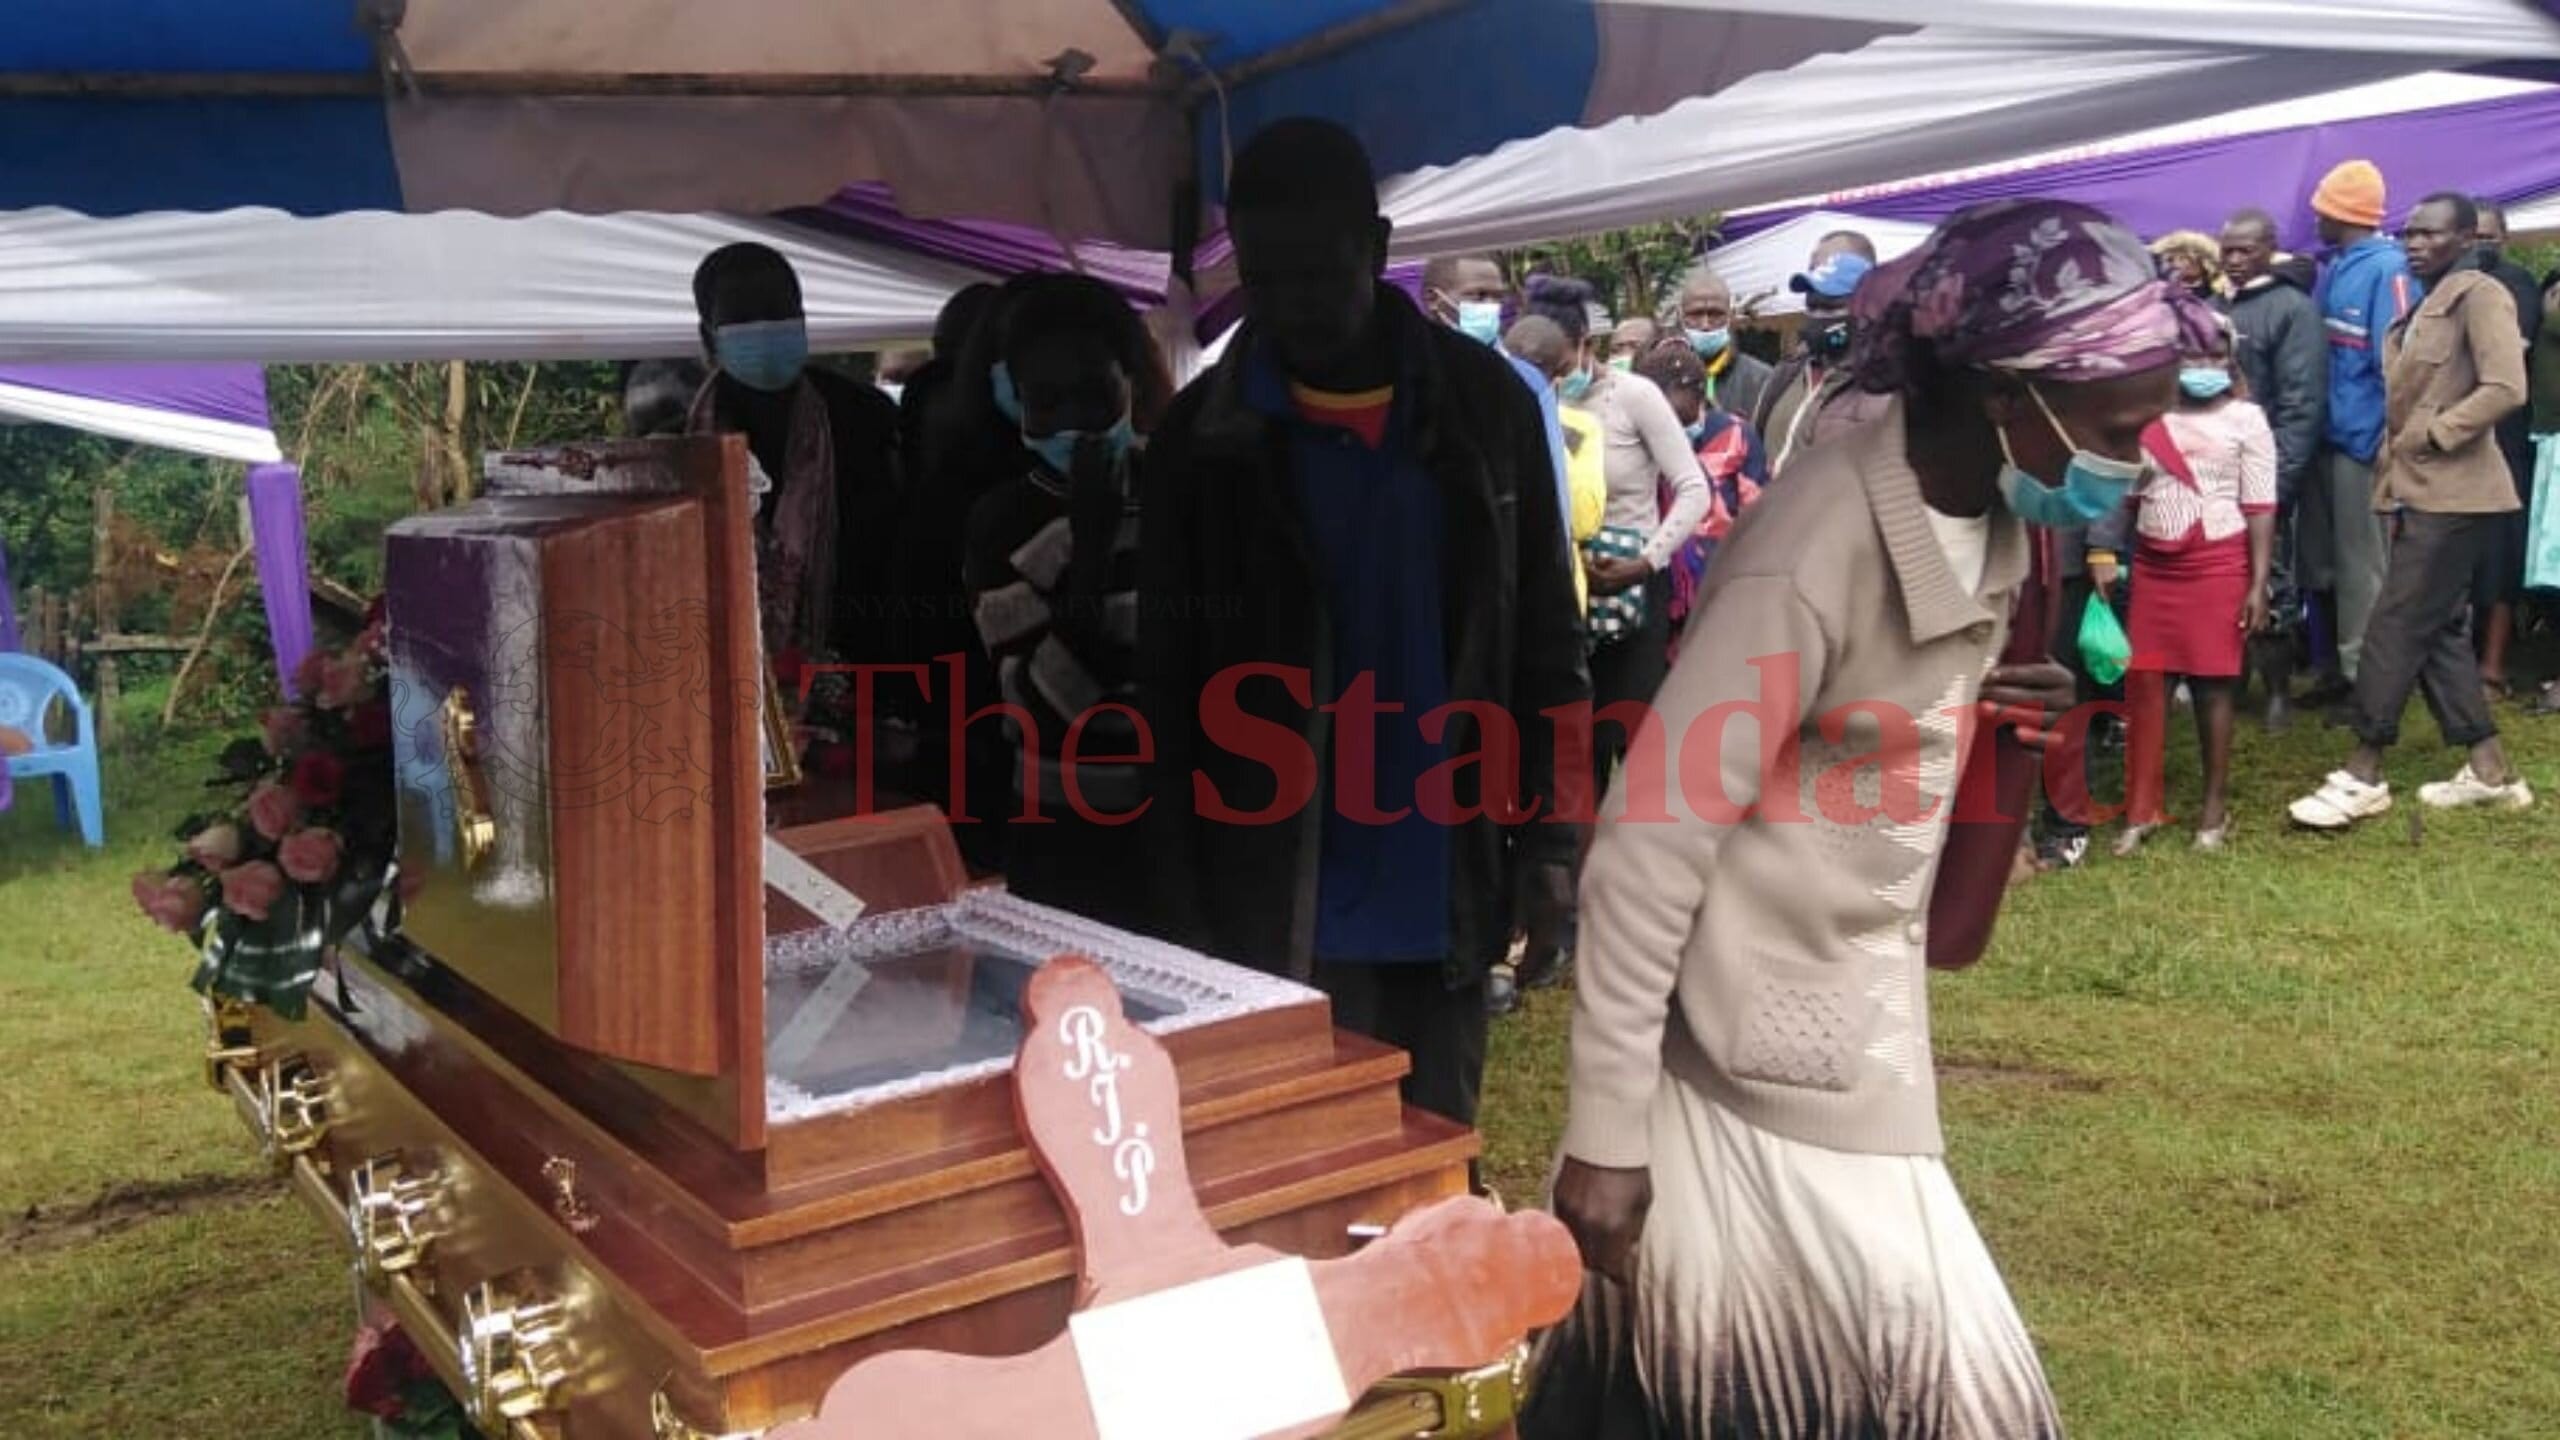 Caroline Kangogo's body was fitted with wedding dress as per her request. Her casket was partially opened to allow mourners to view her body. 